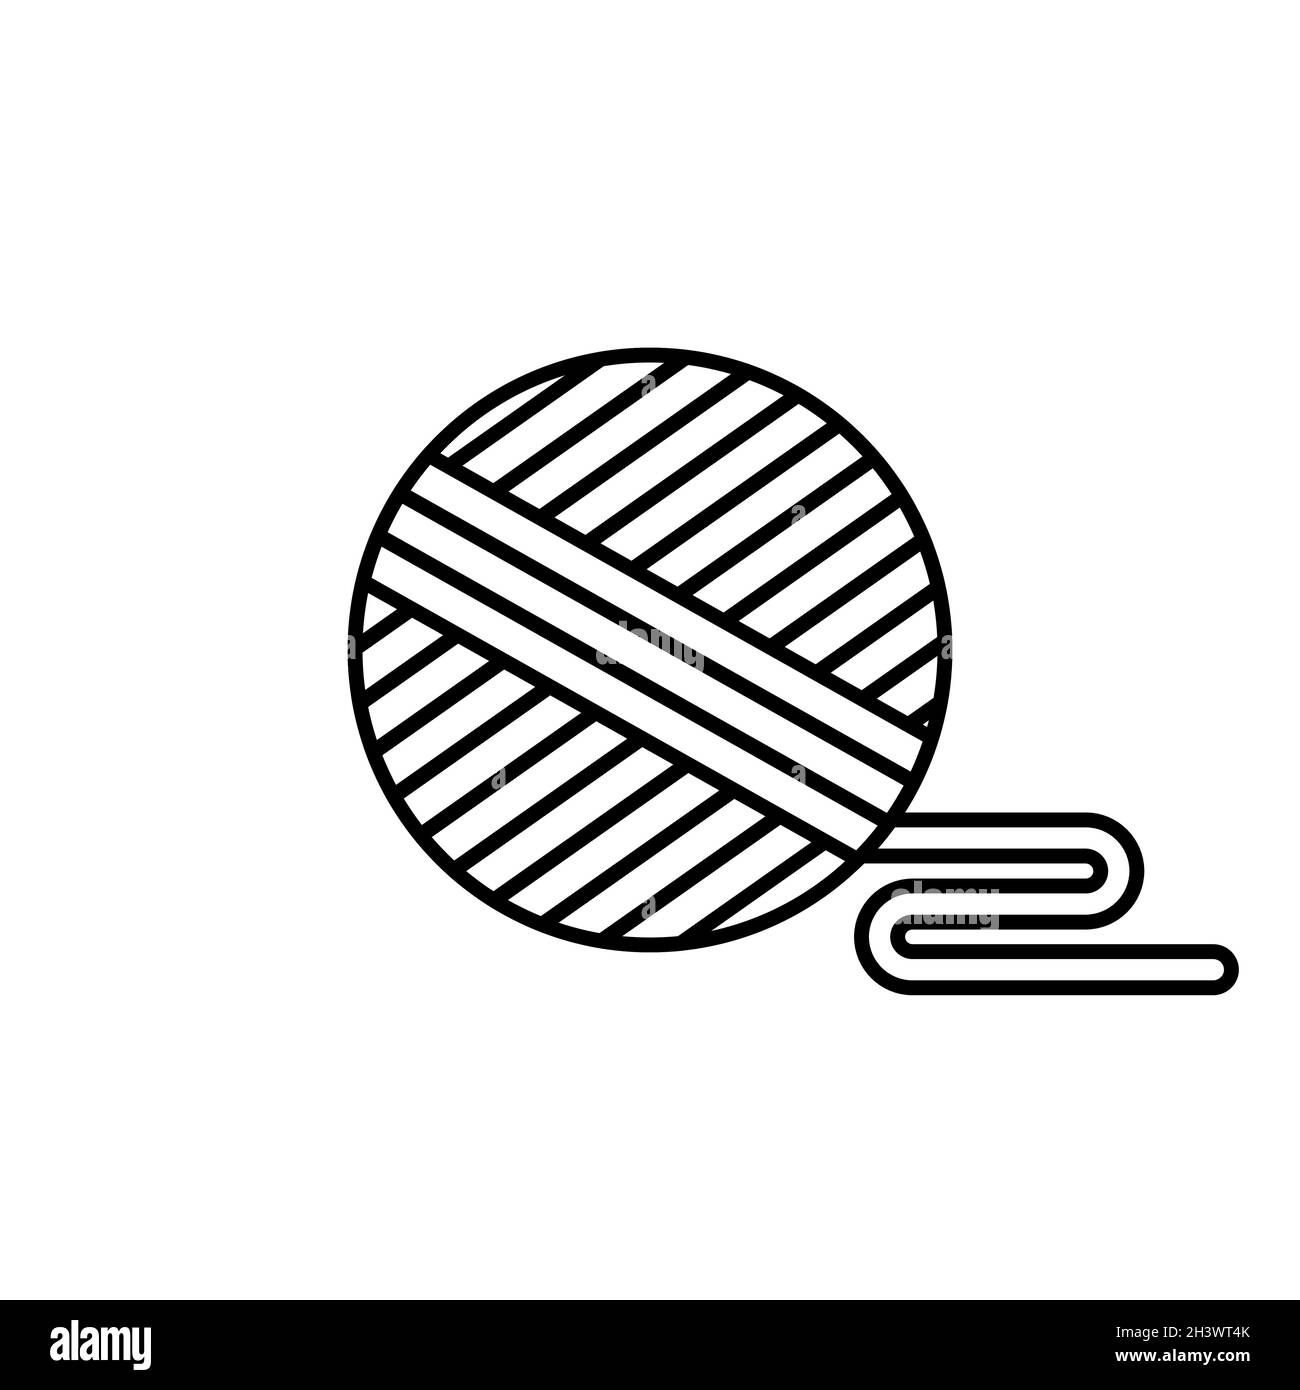 Yarn ball icon. Knitting hobby round wool fiber roll. Vector illustration isolated on white background. Stock Vector